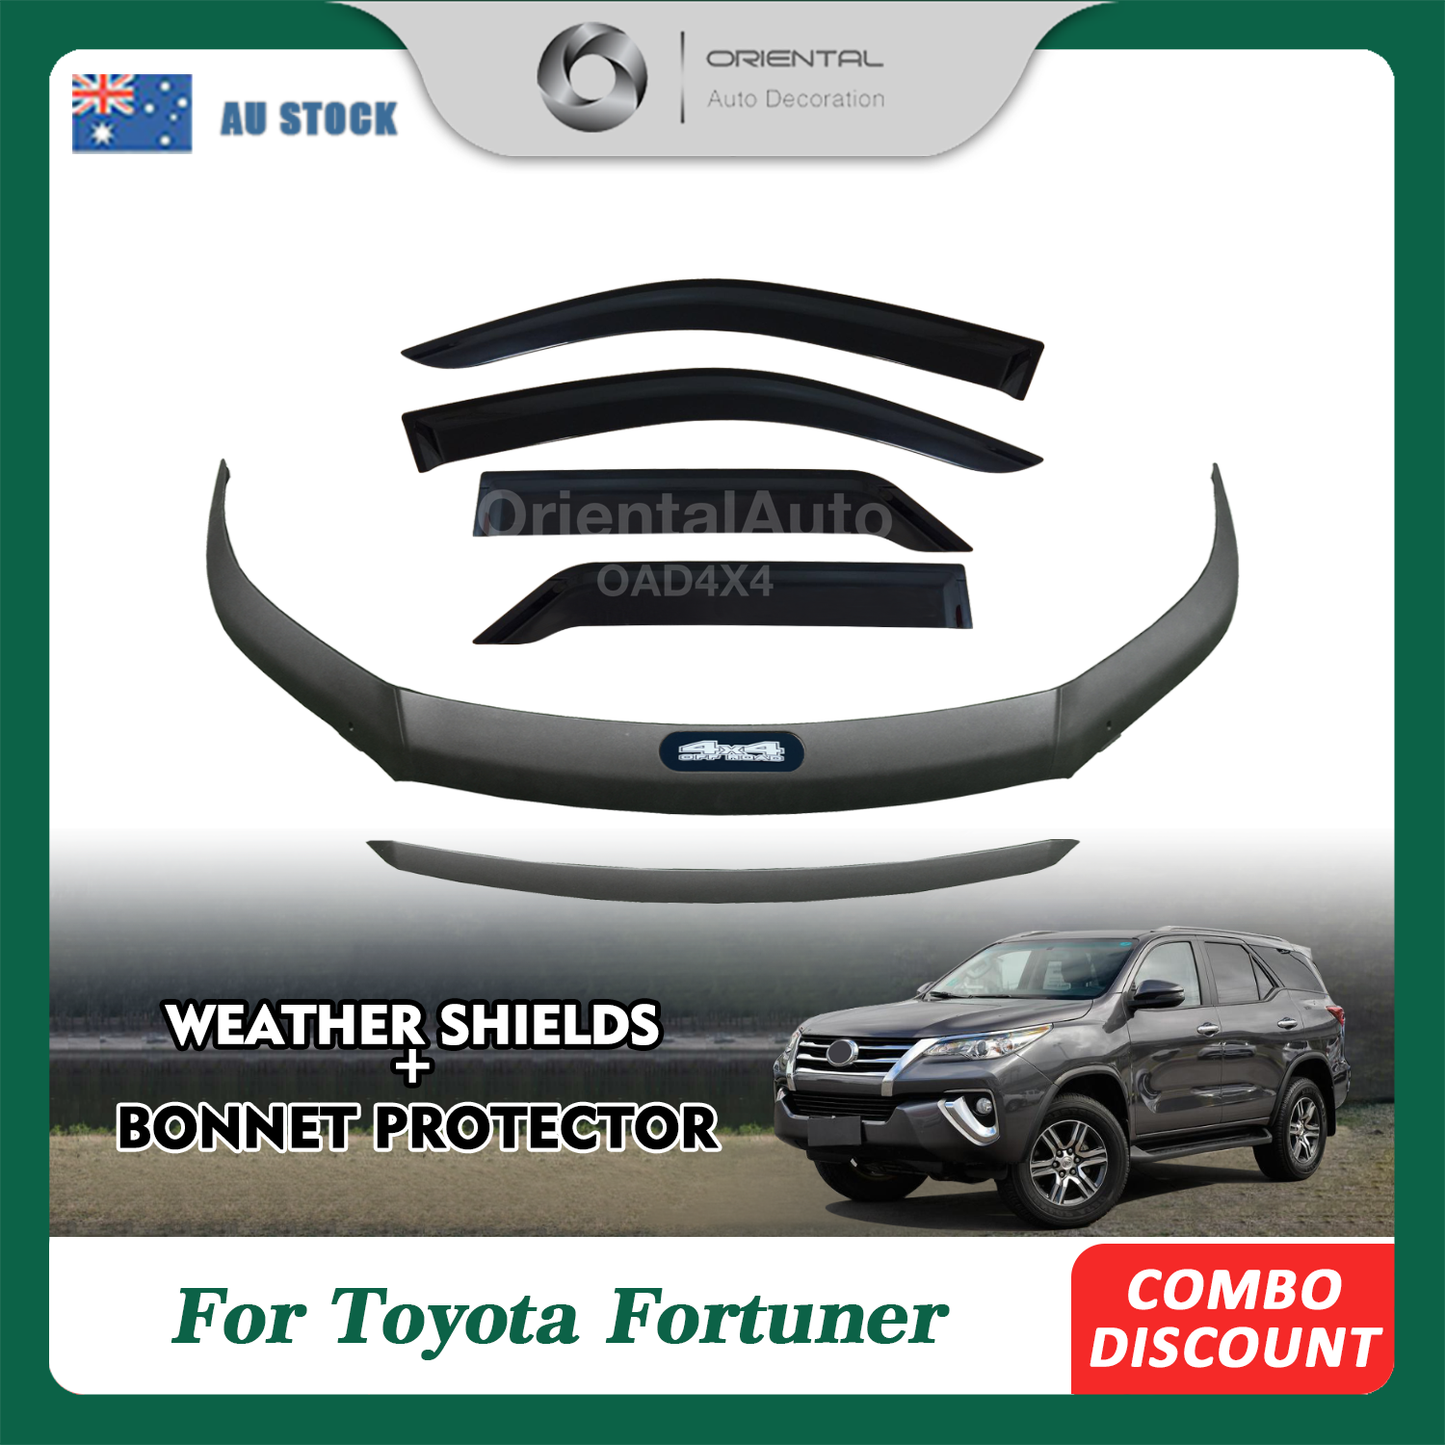 Injection Modeling Bonnet Protector & Injection Weathershield for Toyota Fortuner 2015-2020 Weather Shields Window Visor Hood Protector Bonnet Guard